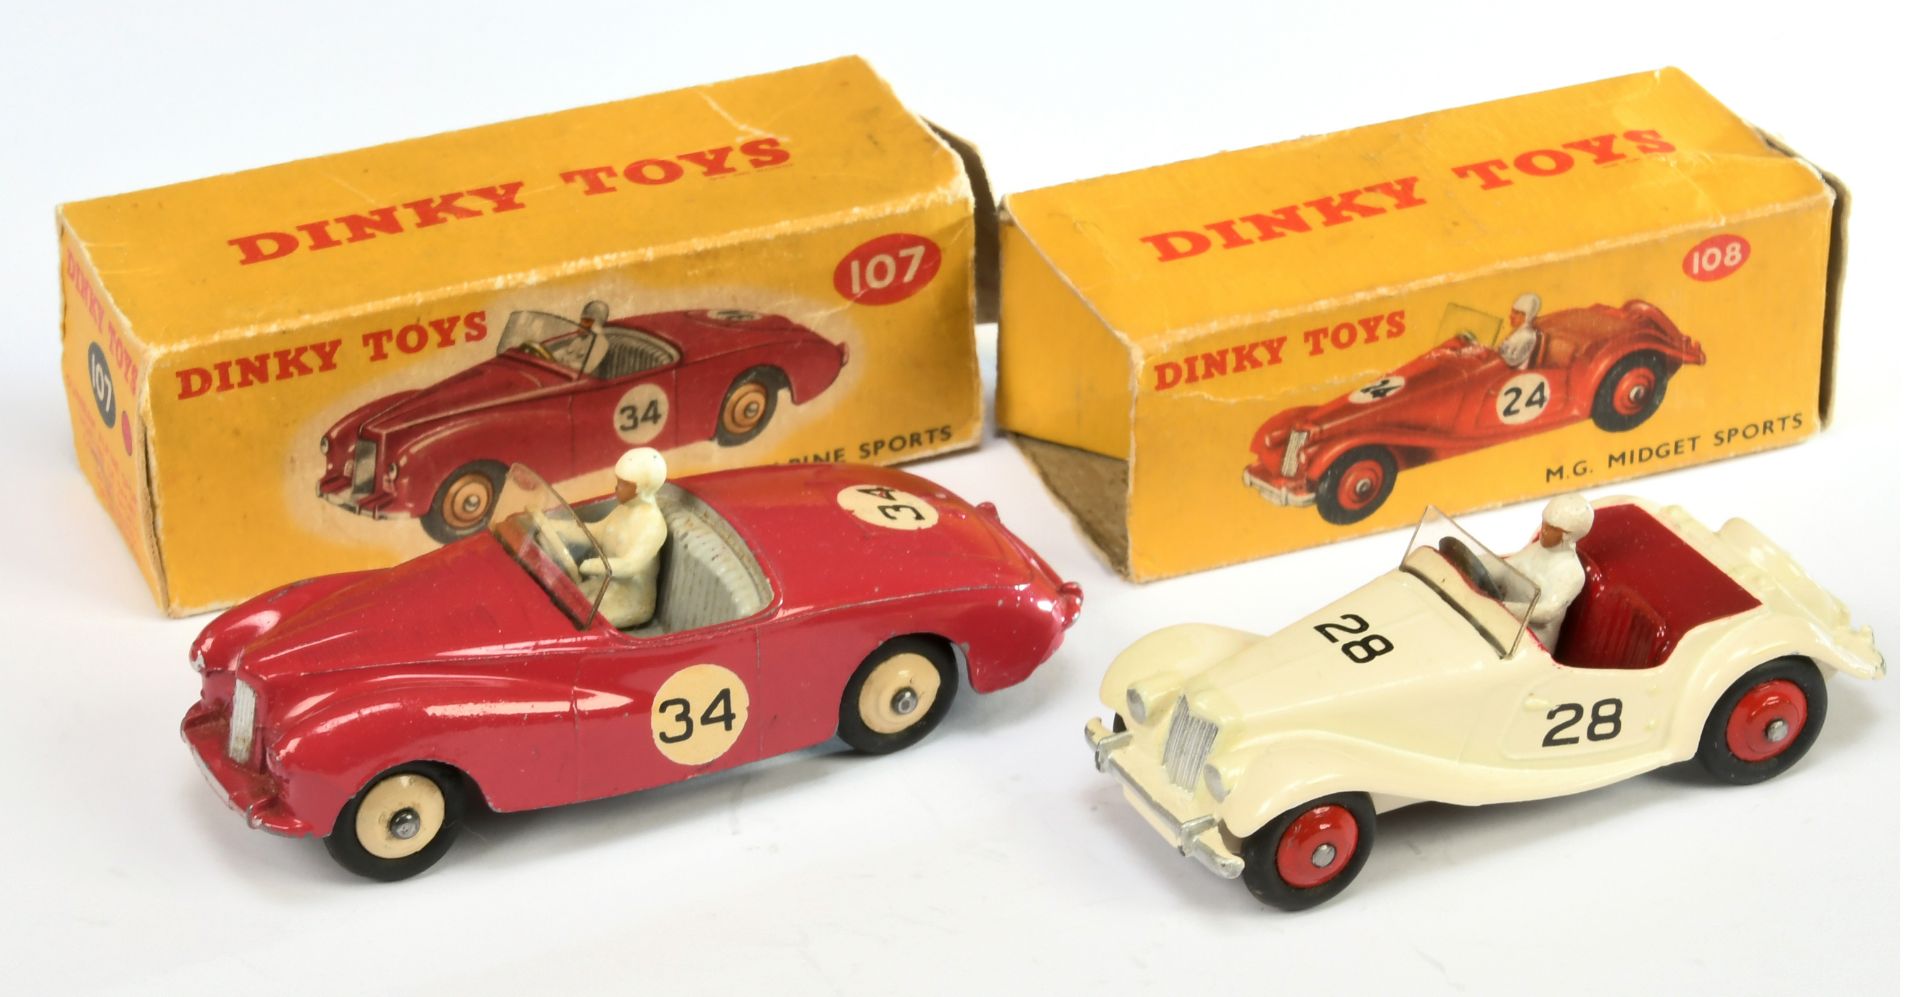 Dinky Toys 107 Sunbeam Al;pine sports - Cerise body, grey interior with figure, silver trim and l...